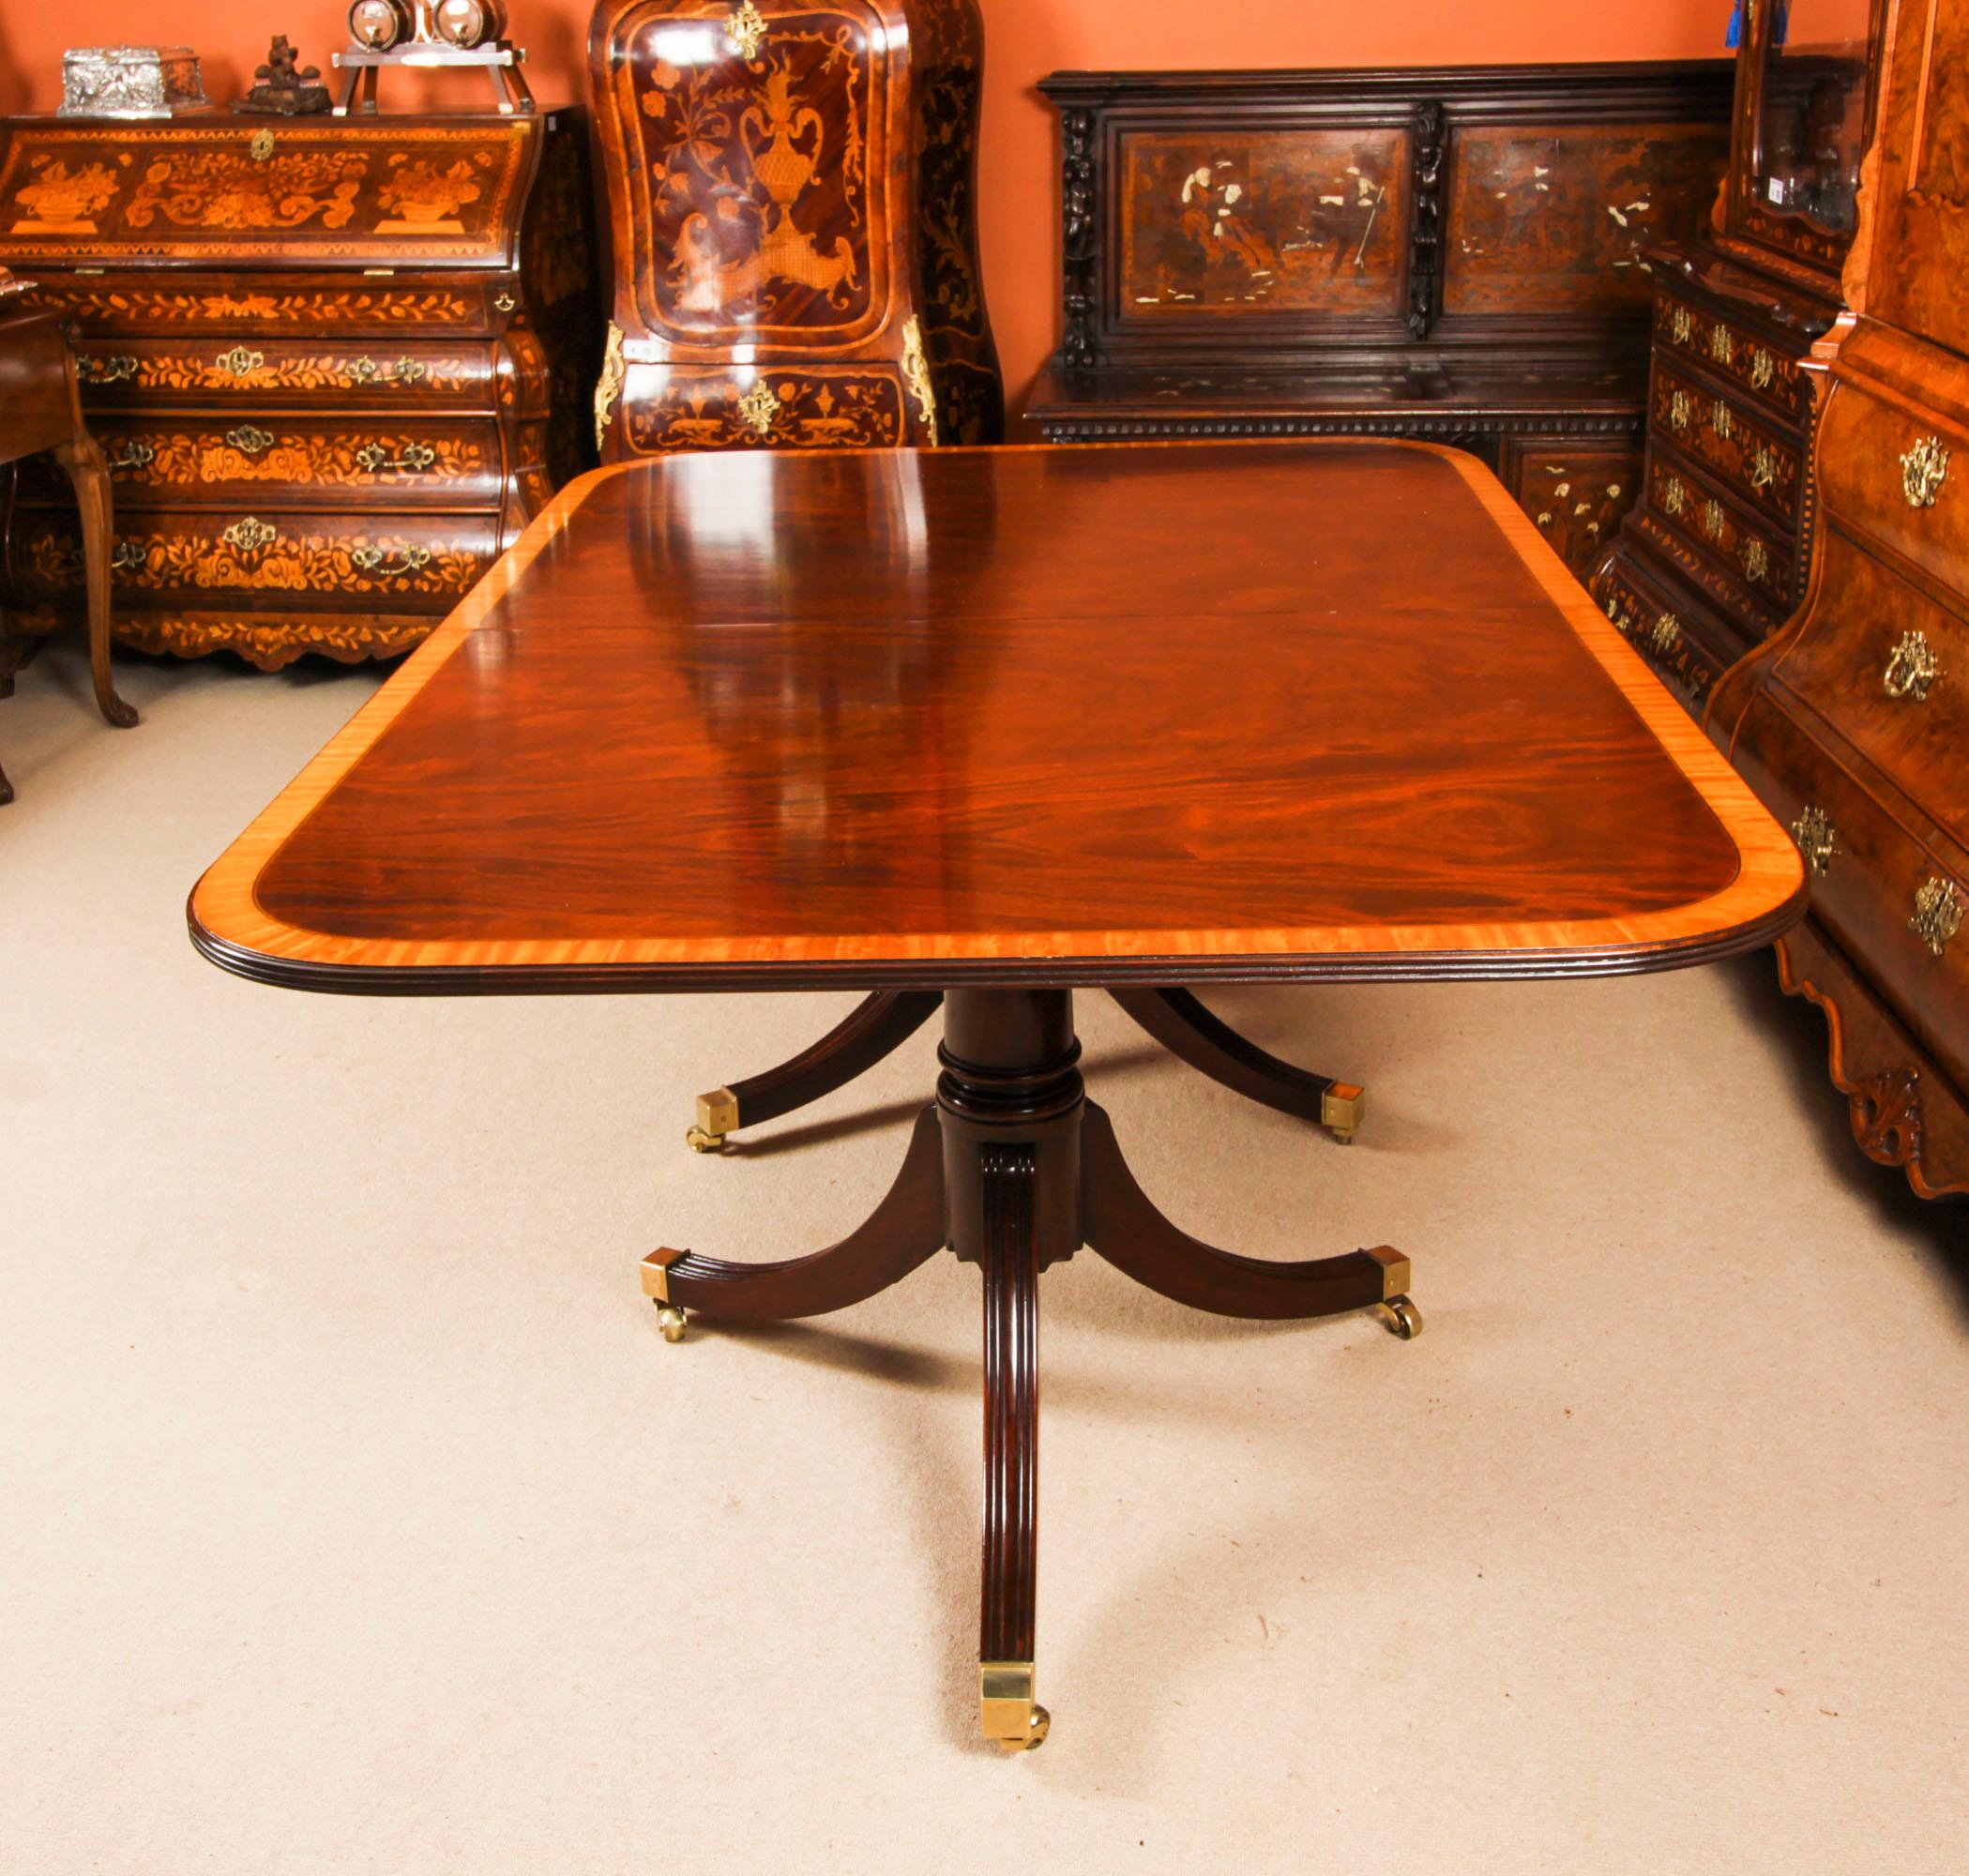 Vintage 13ft Three Pillar Mahogany Dining Table with 14 Chairs 20th C For Sale 4